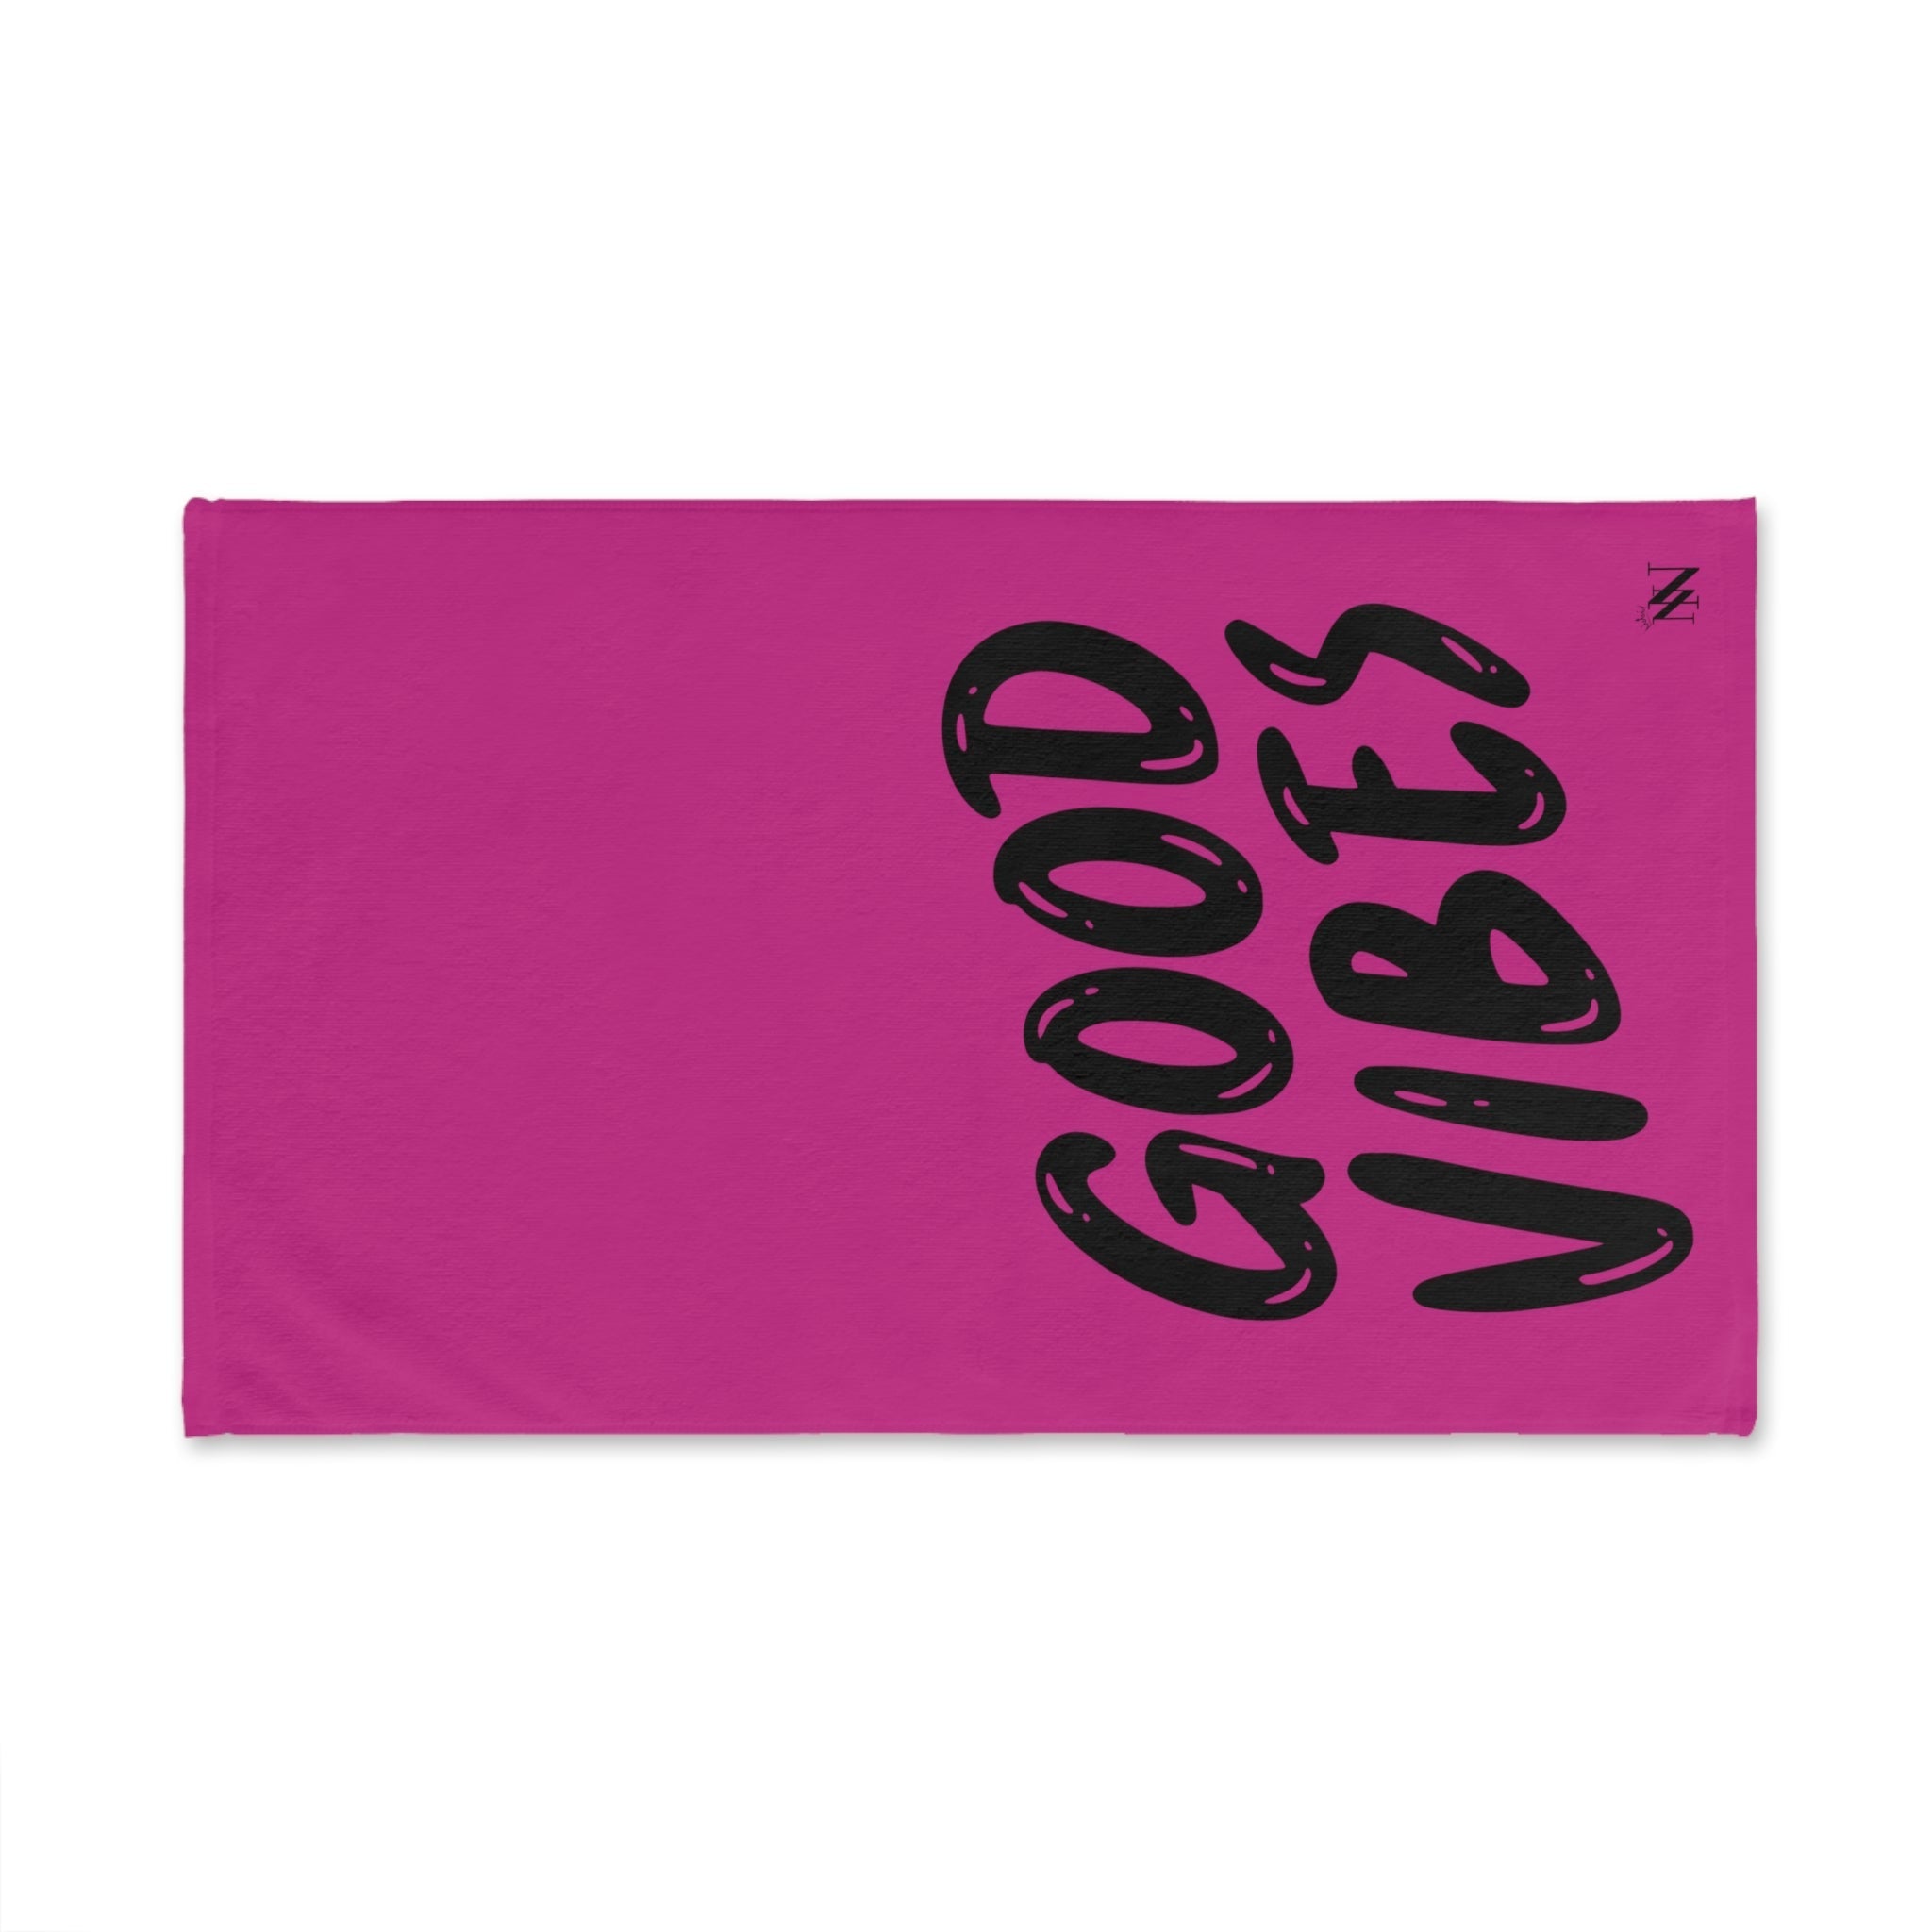 Good Vibes Bubble Fuscia | Funny Gifts for Men - Gifts for Him - Birthday Gifts for Men, Him, Husband, Boyfriend, New Couple Gifts, Fathers & Valentines Day Gifts, Hand Towels NECTAR NAPKINS